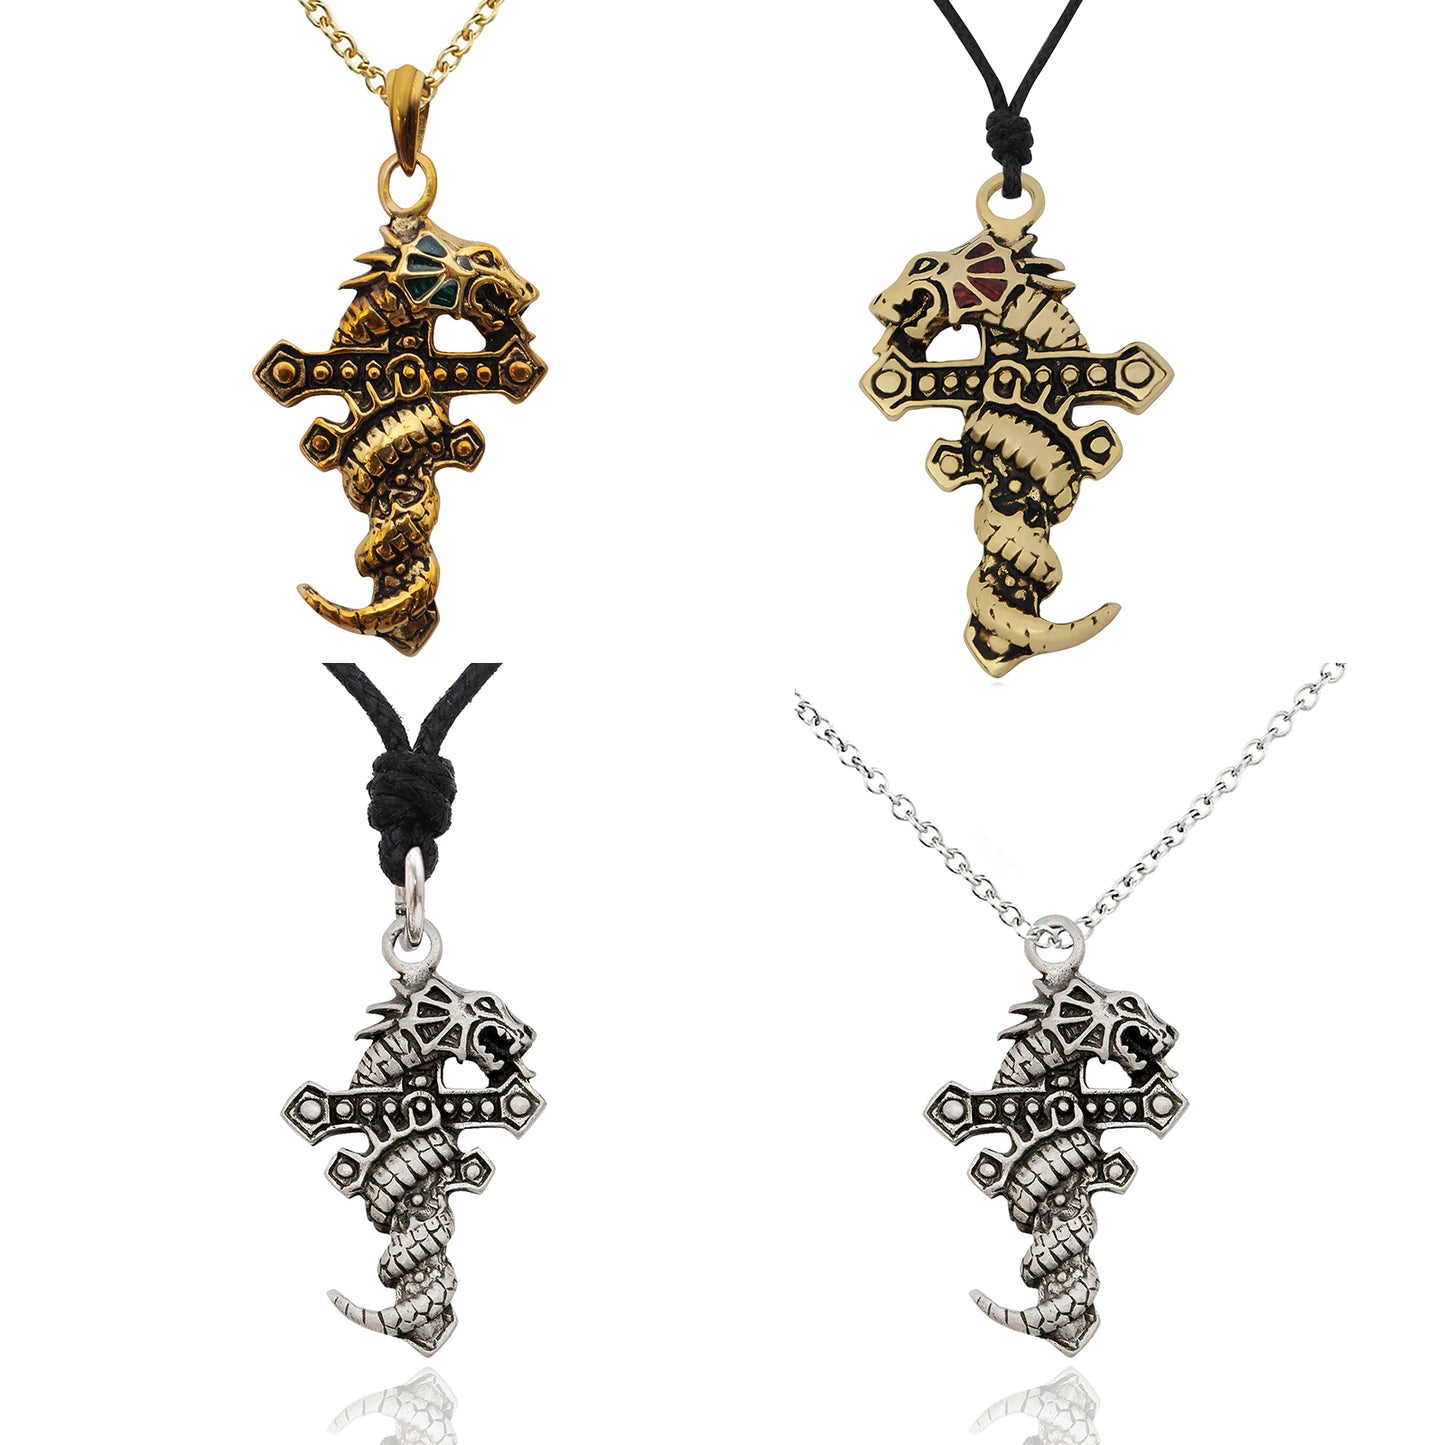 Colorful Dragon Cross Silver Pewter Gold Brass Charm Necklace Pendant Jewelry